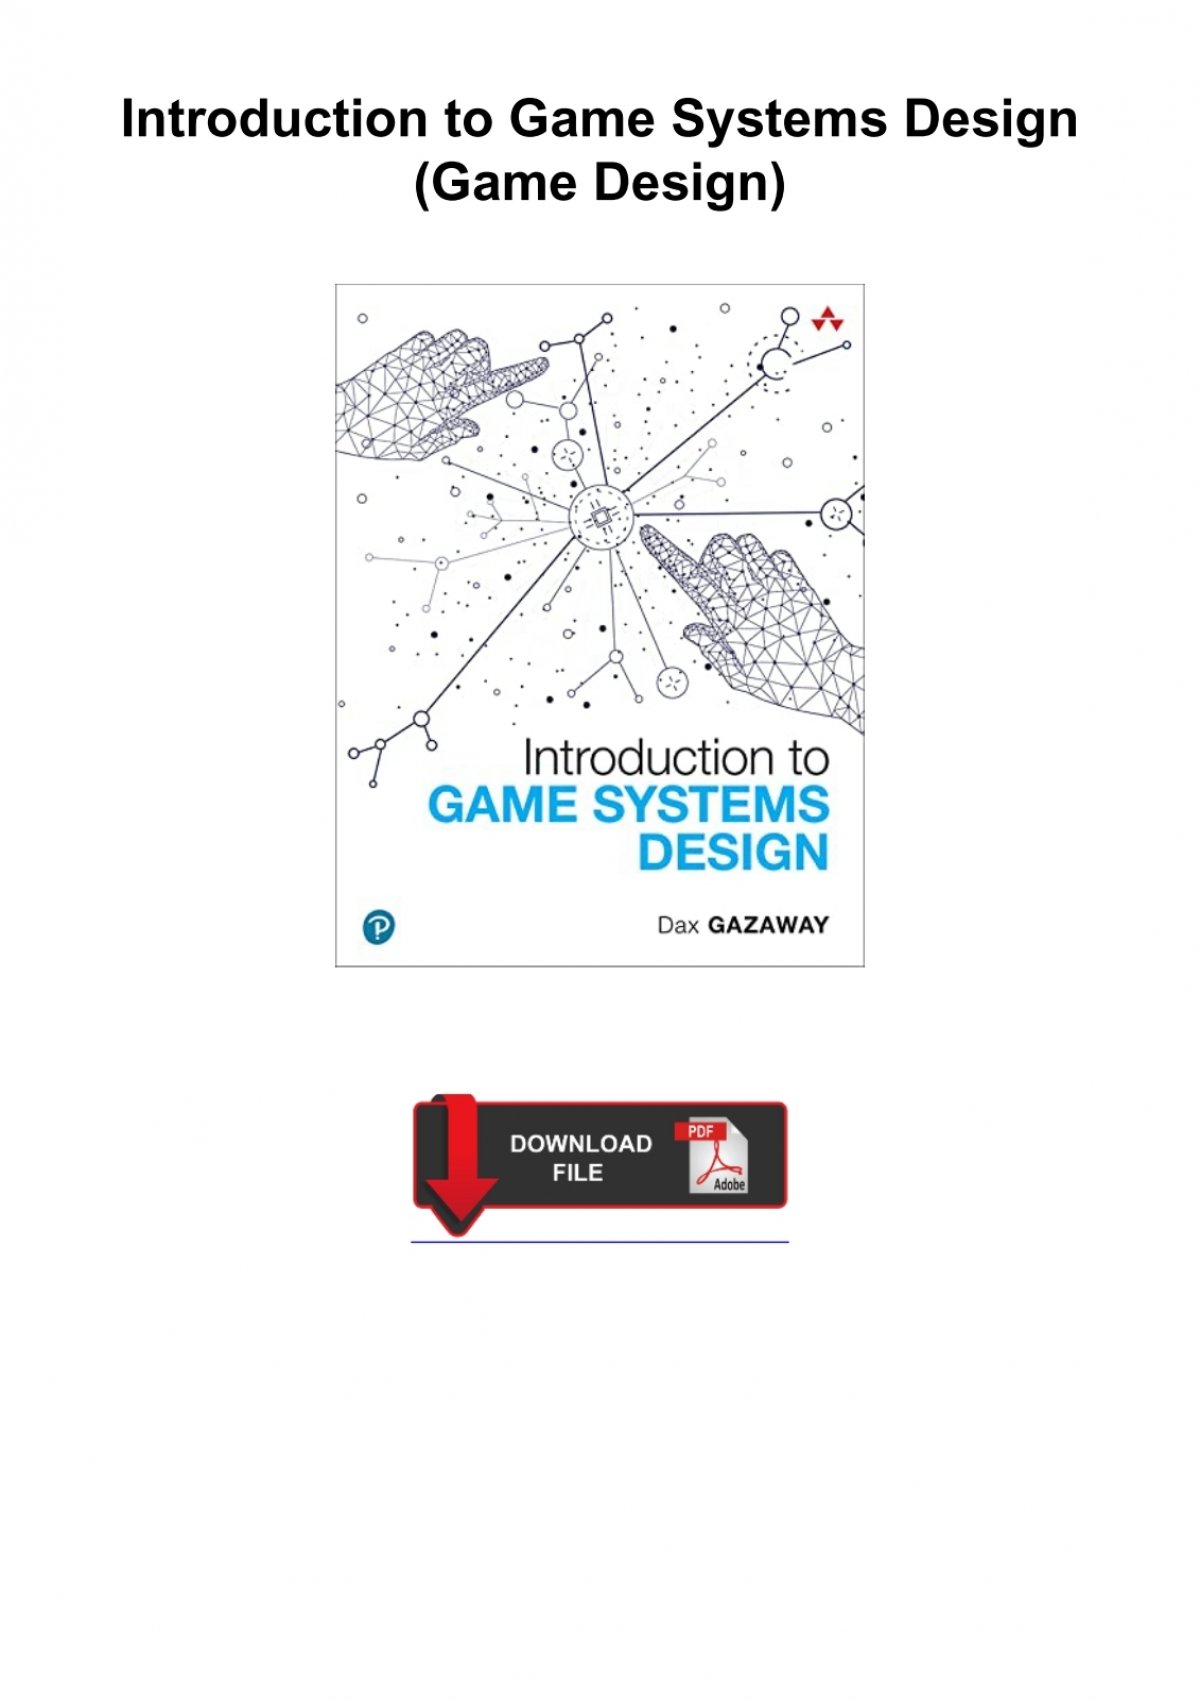 PDF) Introduction to Game Design, Development, and Criticism (GAME 201T)